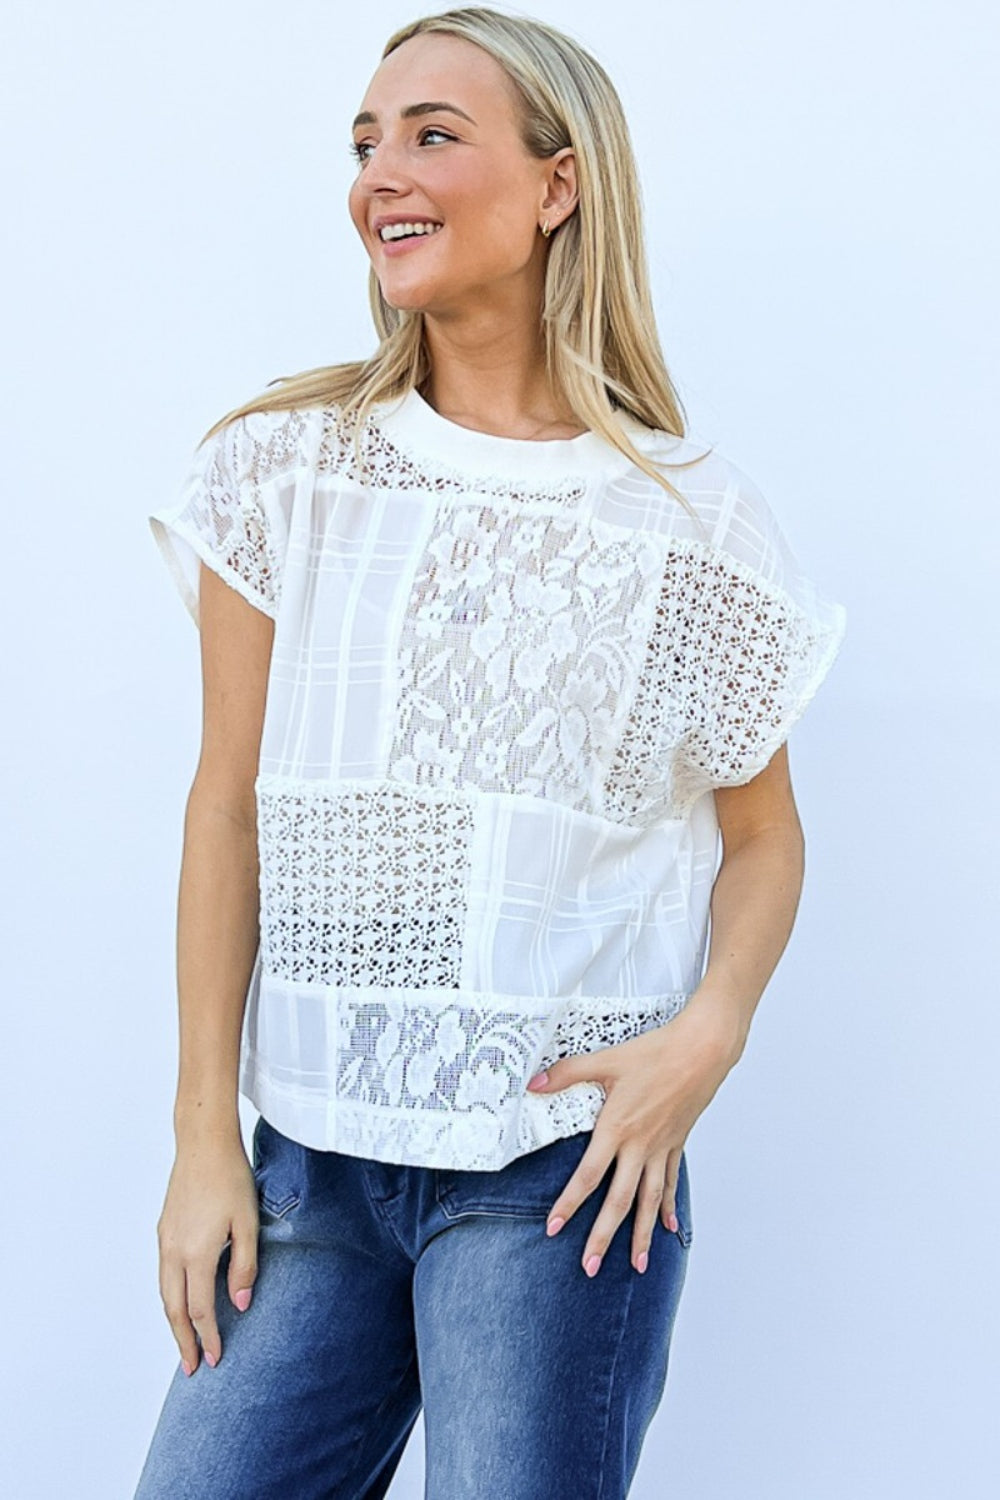 Chic lace patchwork top with cami set, showcasing delicate eyelet details.